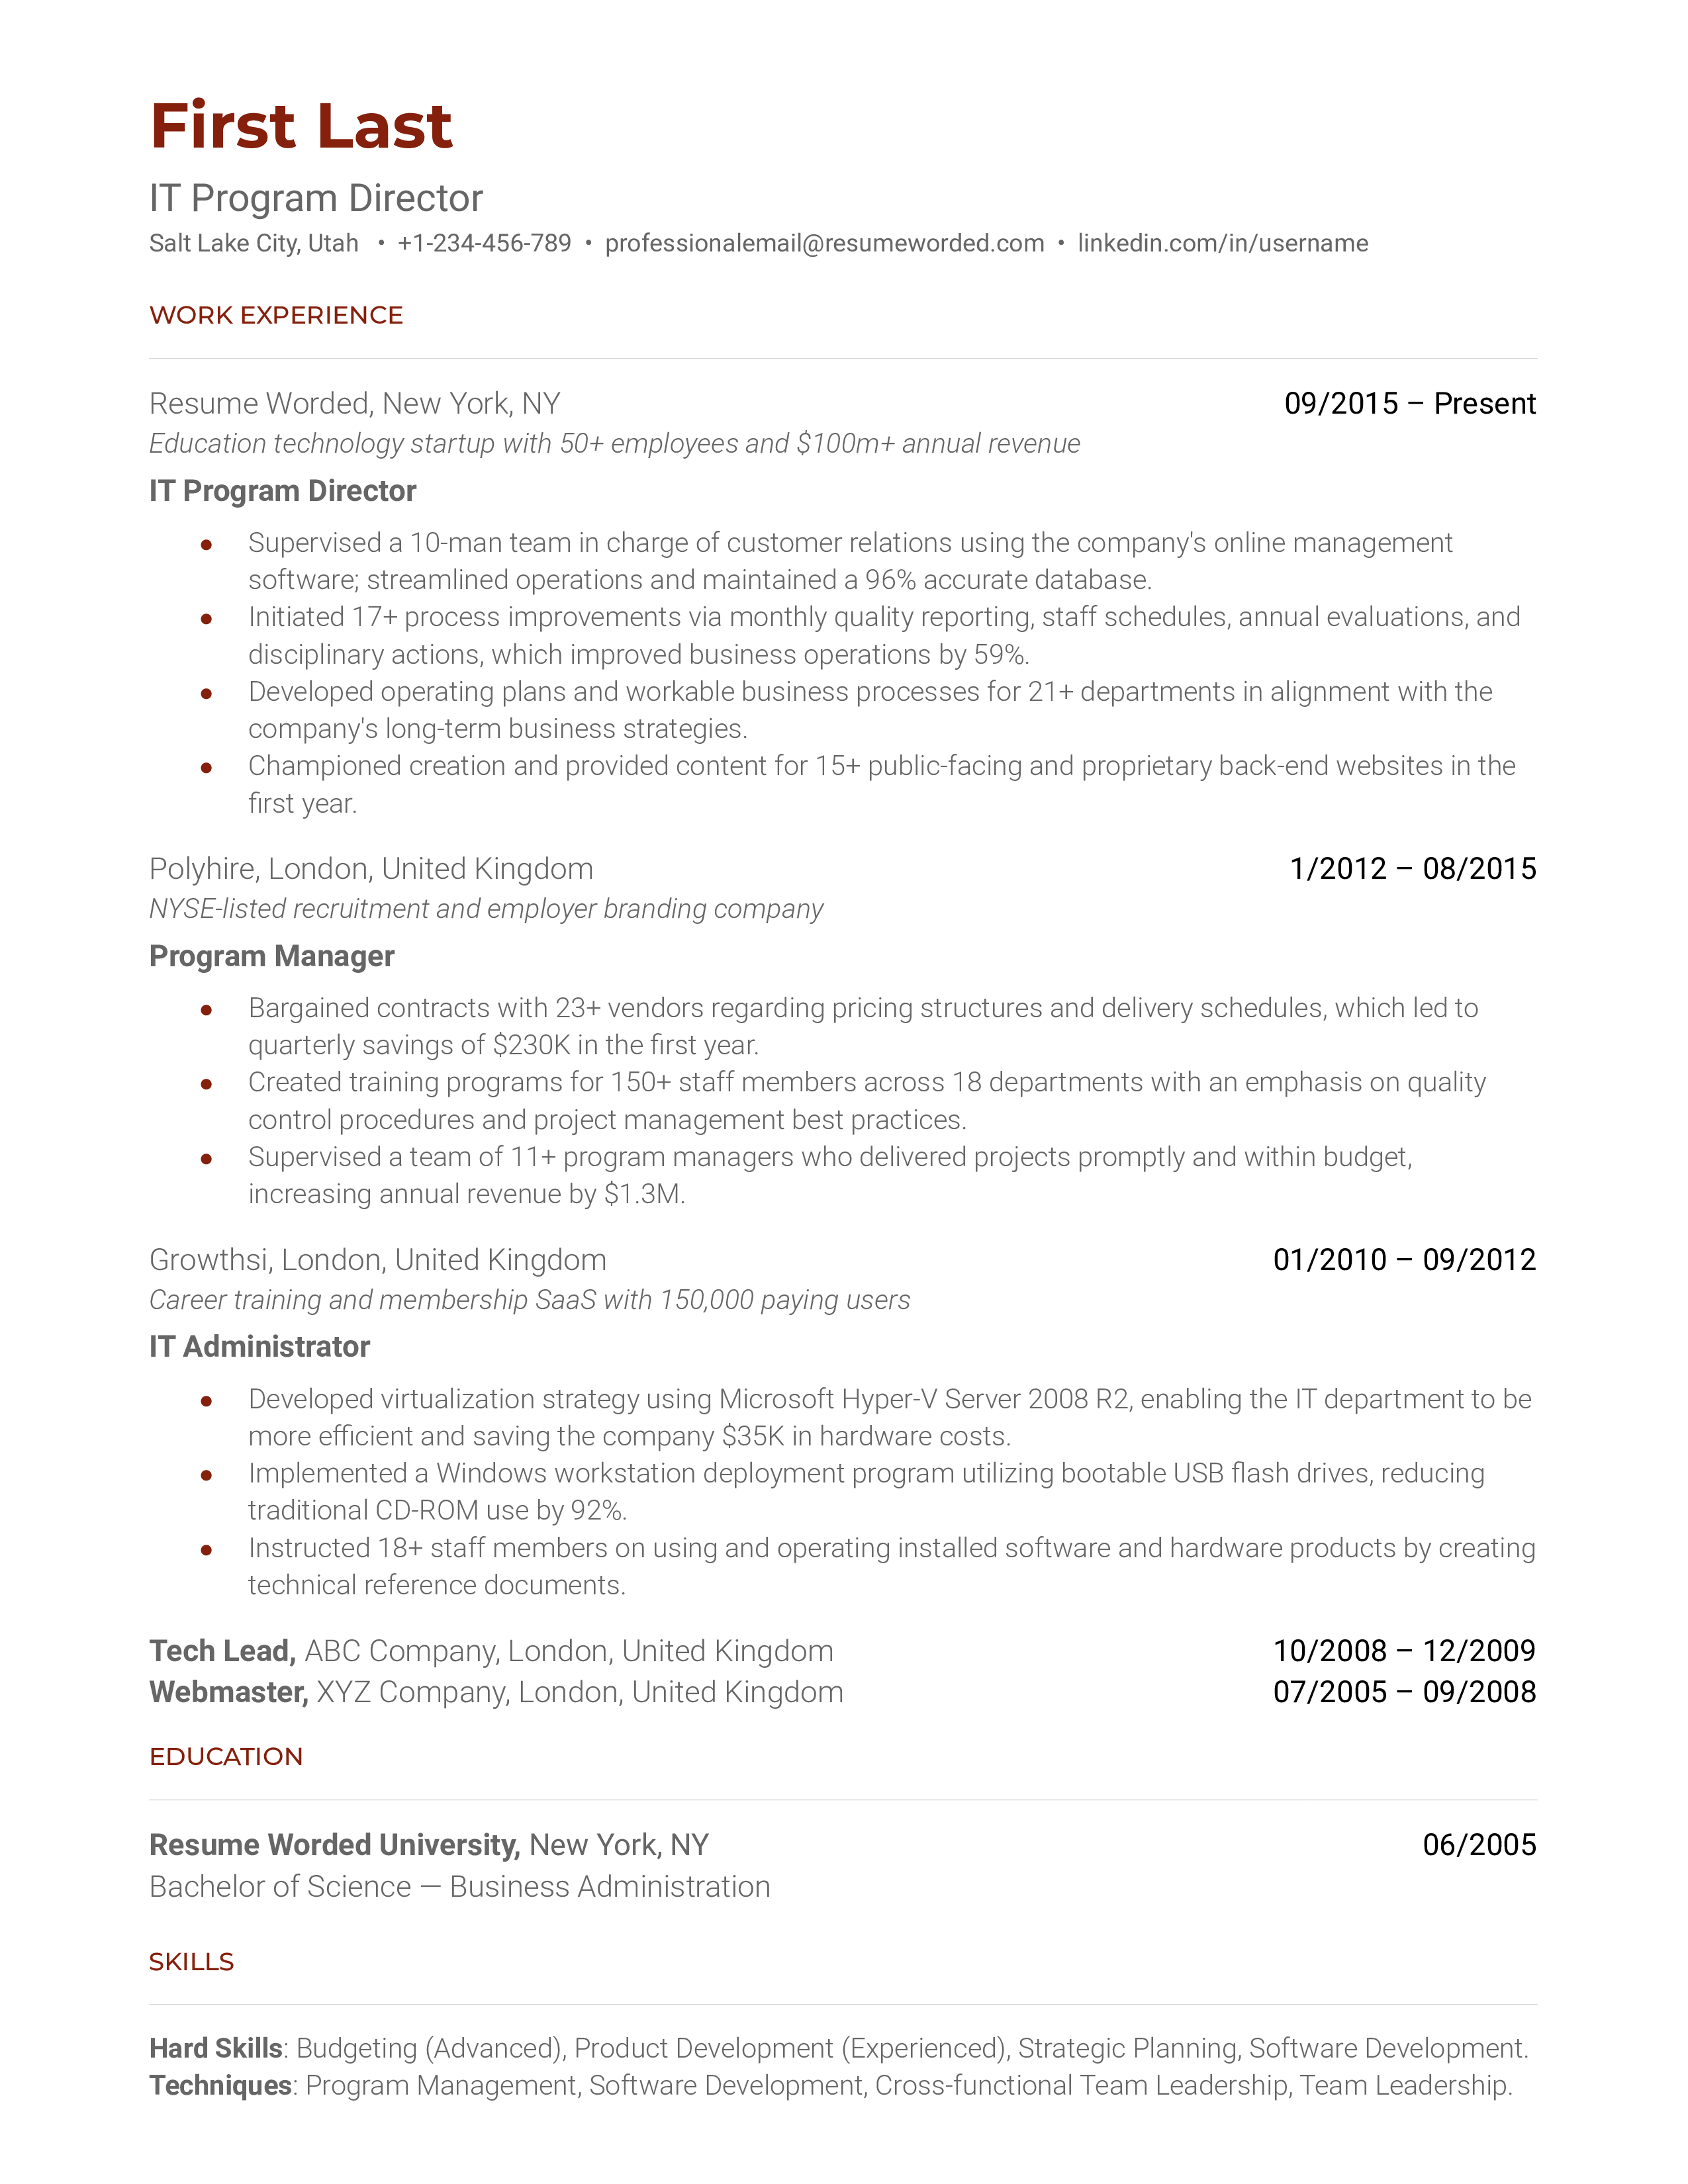 A comprehensive and targeted CV for an IT Program Director role.